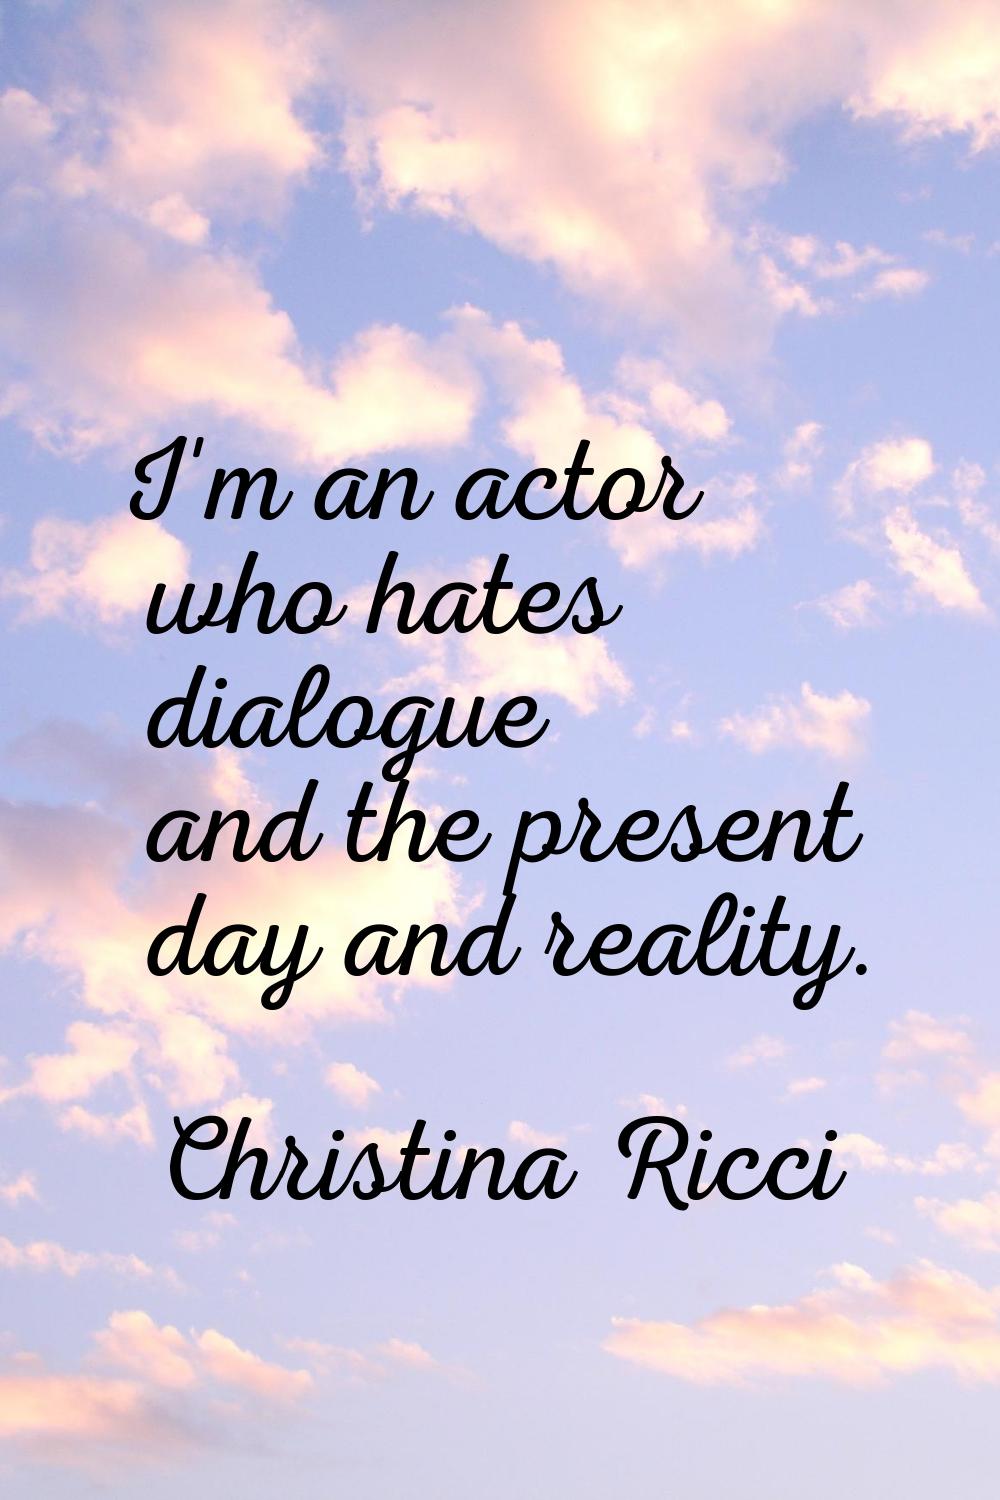 I'm an actor who hates dialogue and the present day and reality.